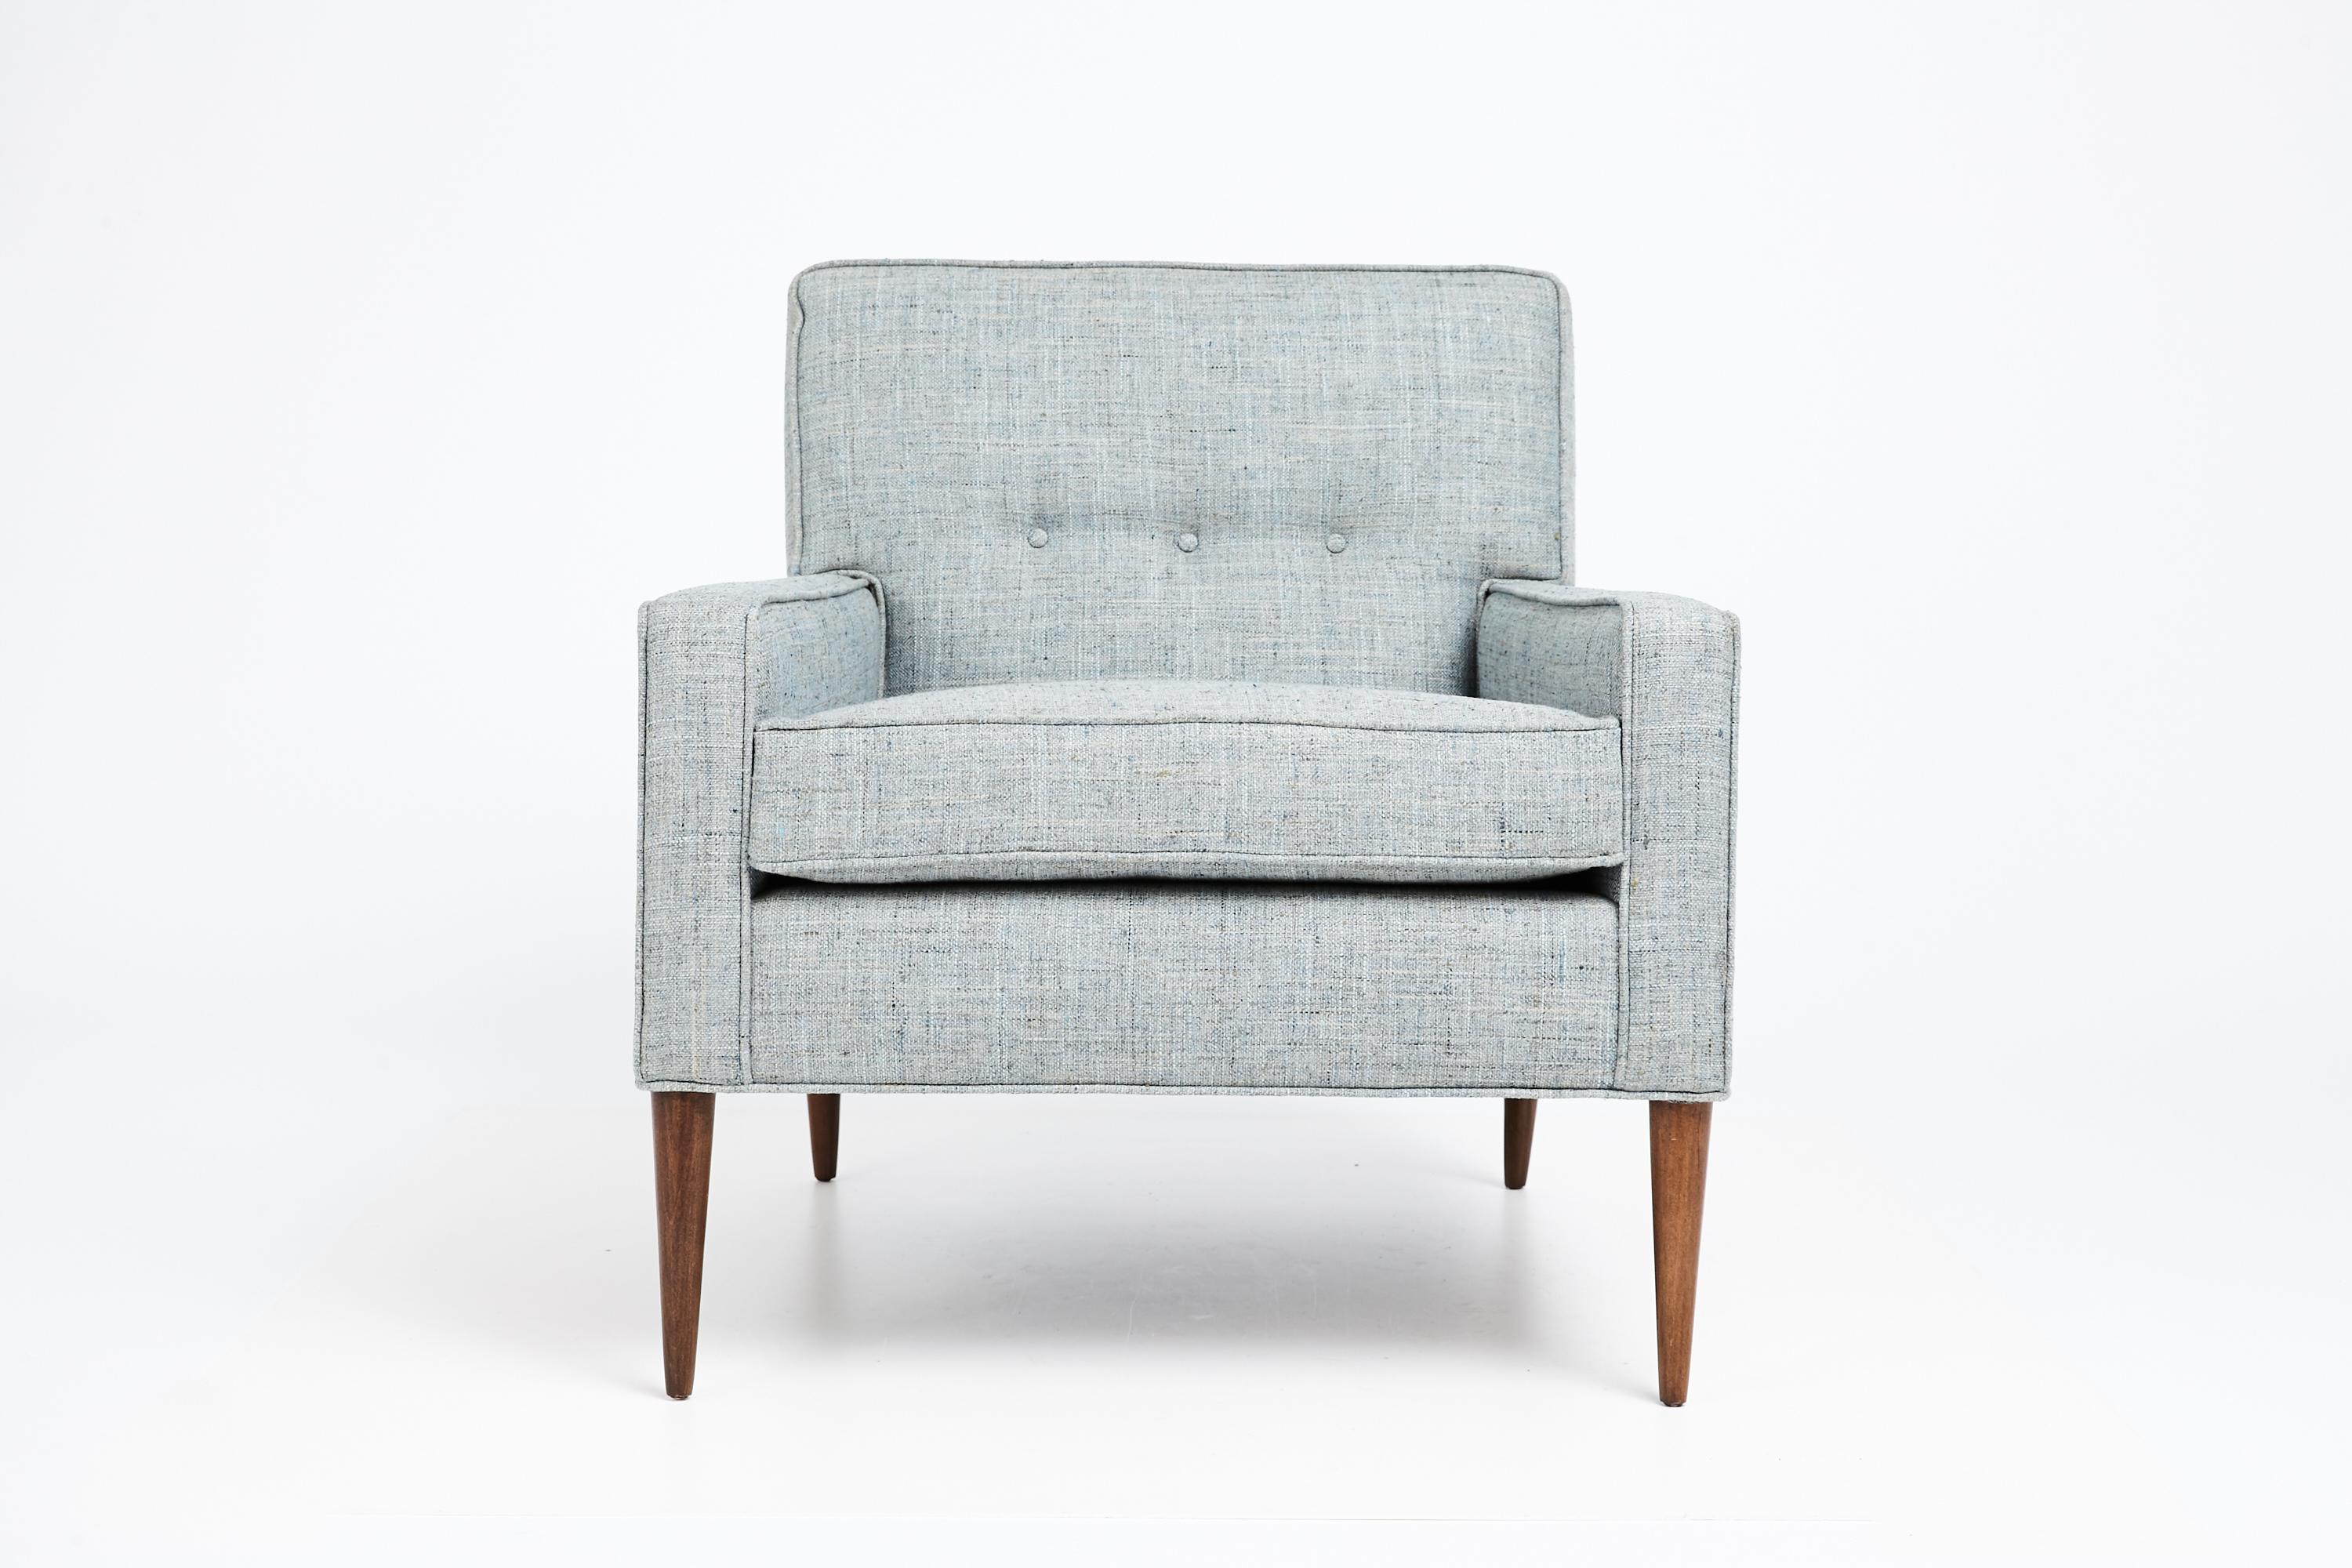 Elegant club chair designed by Paul McCobb in the mid 1950s. Classic McCobb design featuring clean lines, slender tapered legs and tufted detail on seat back. The chair has been fully restored from top to bottom. Newly reupholstered in a woven blue,